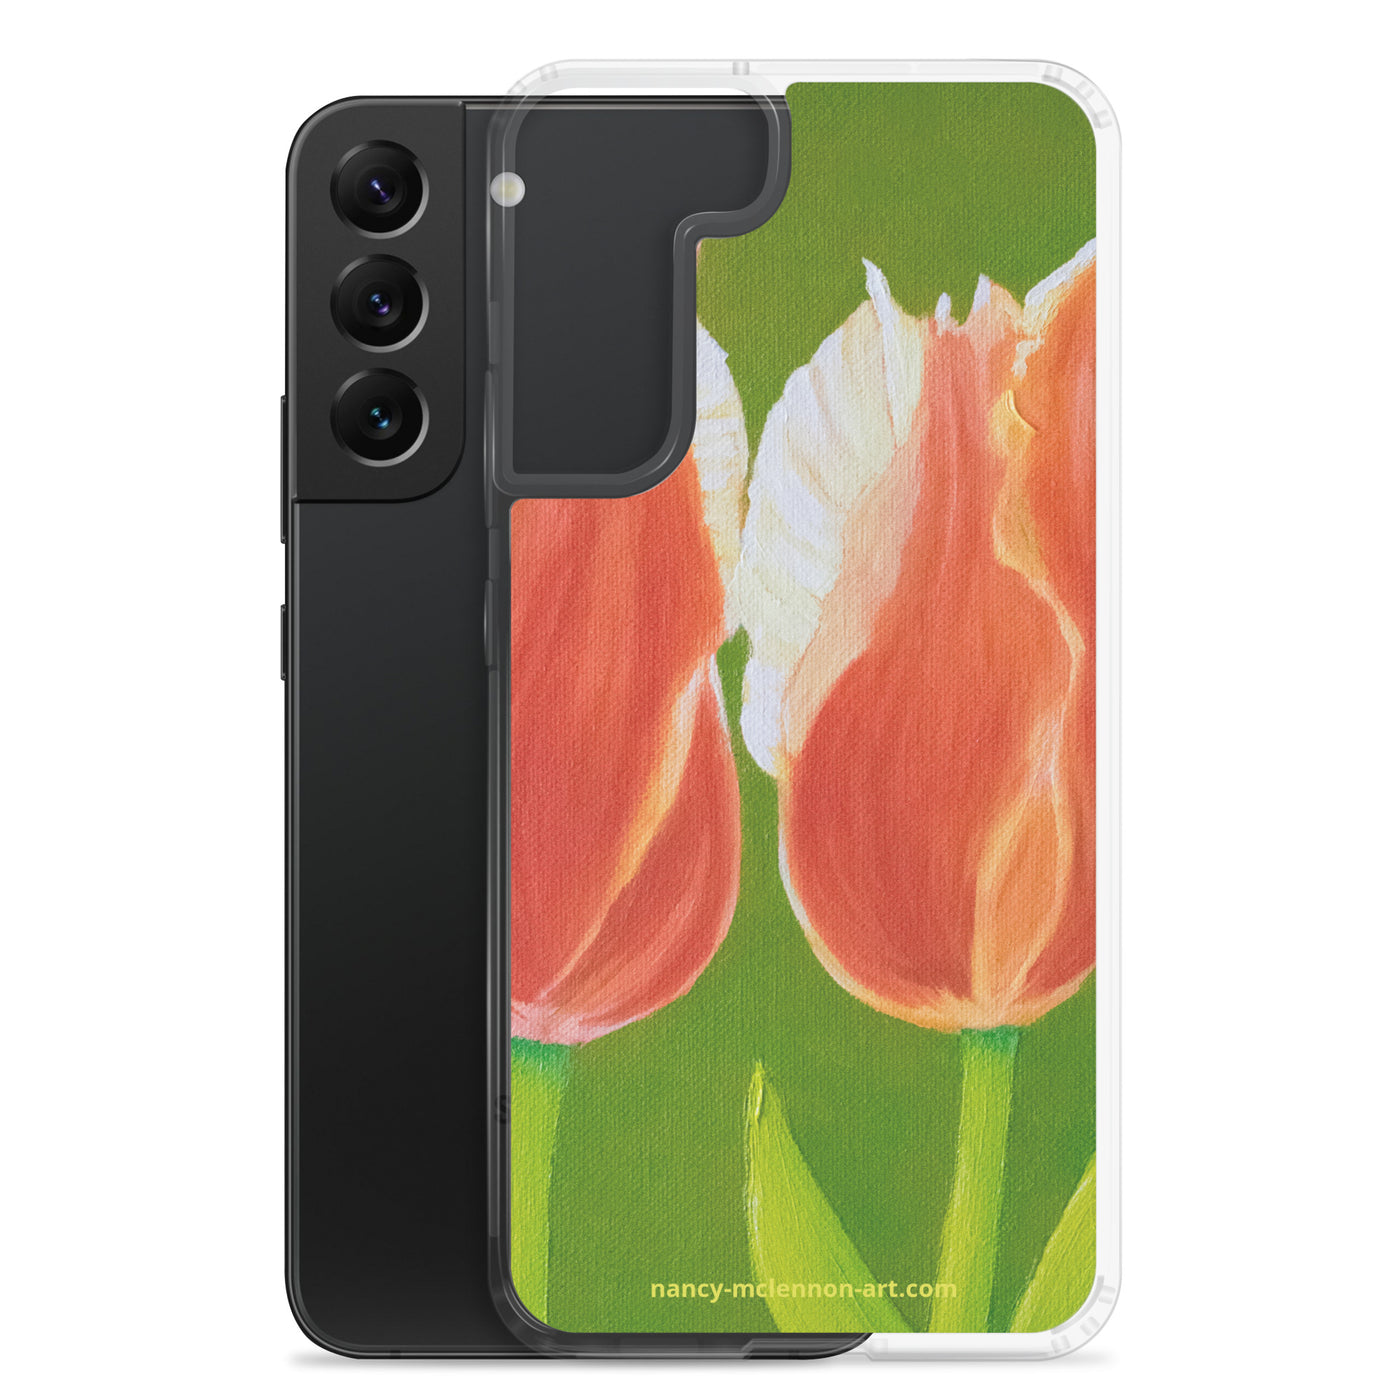 Samsung® Case - Two tulips on green